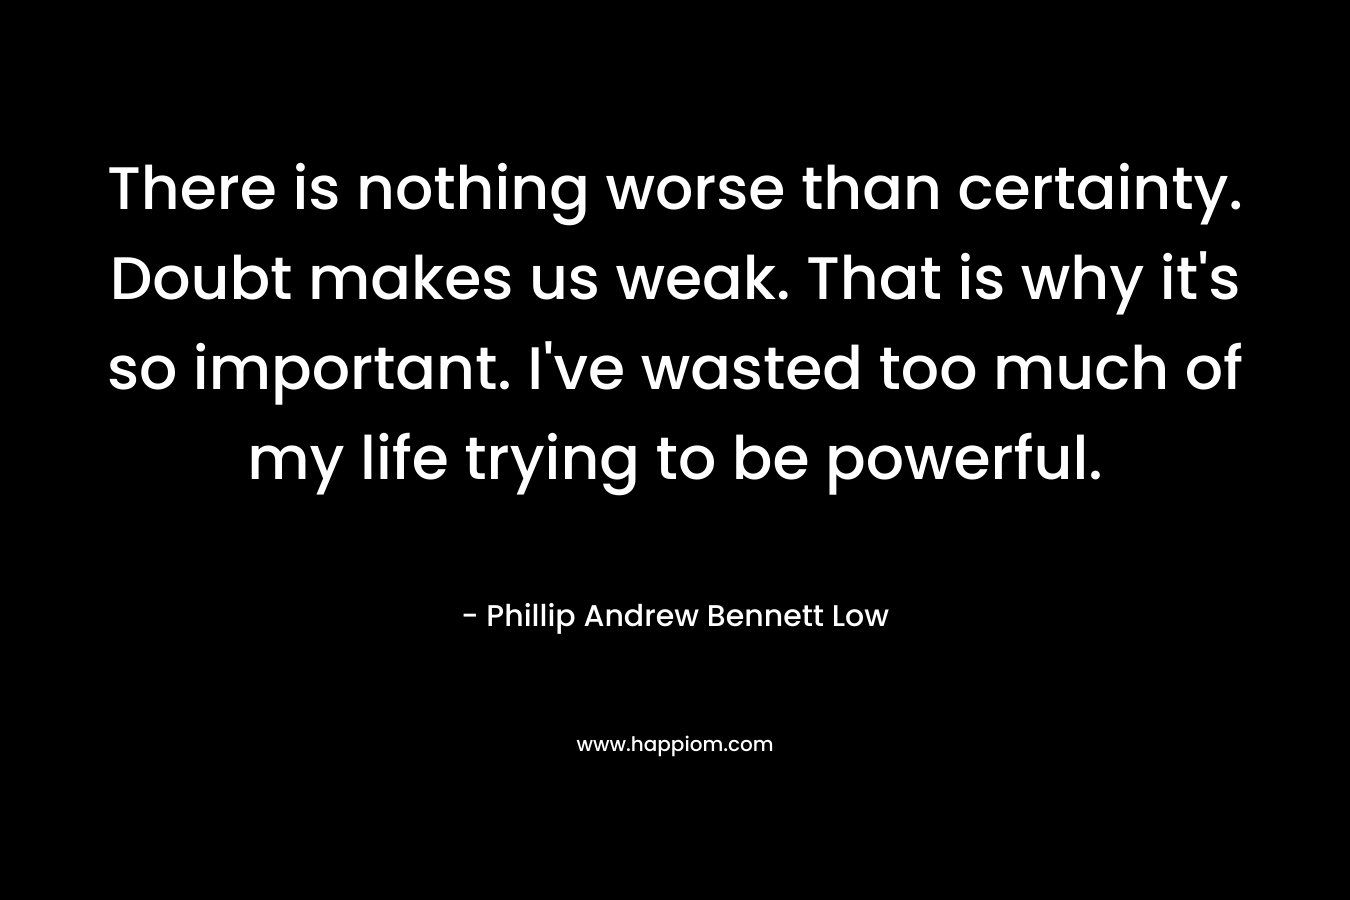 There is nothing worse than certainty. Doubt makes us weak. That is why it’s so important. I’ve wasted too much of my life trying to be powerful. – Phillip Andrew Bennett Low